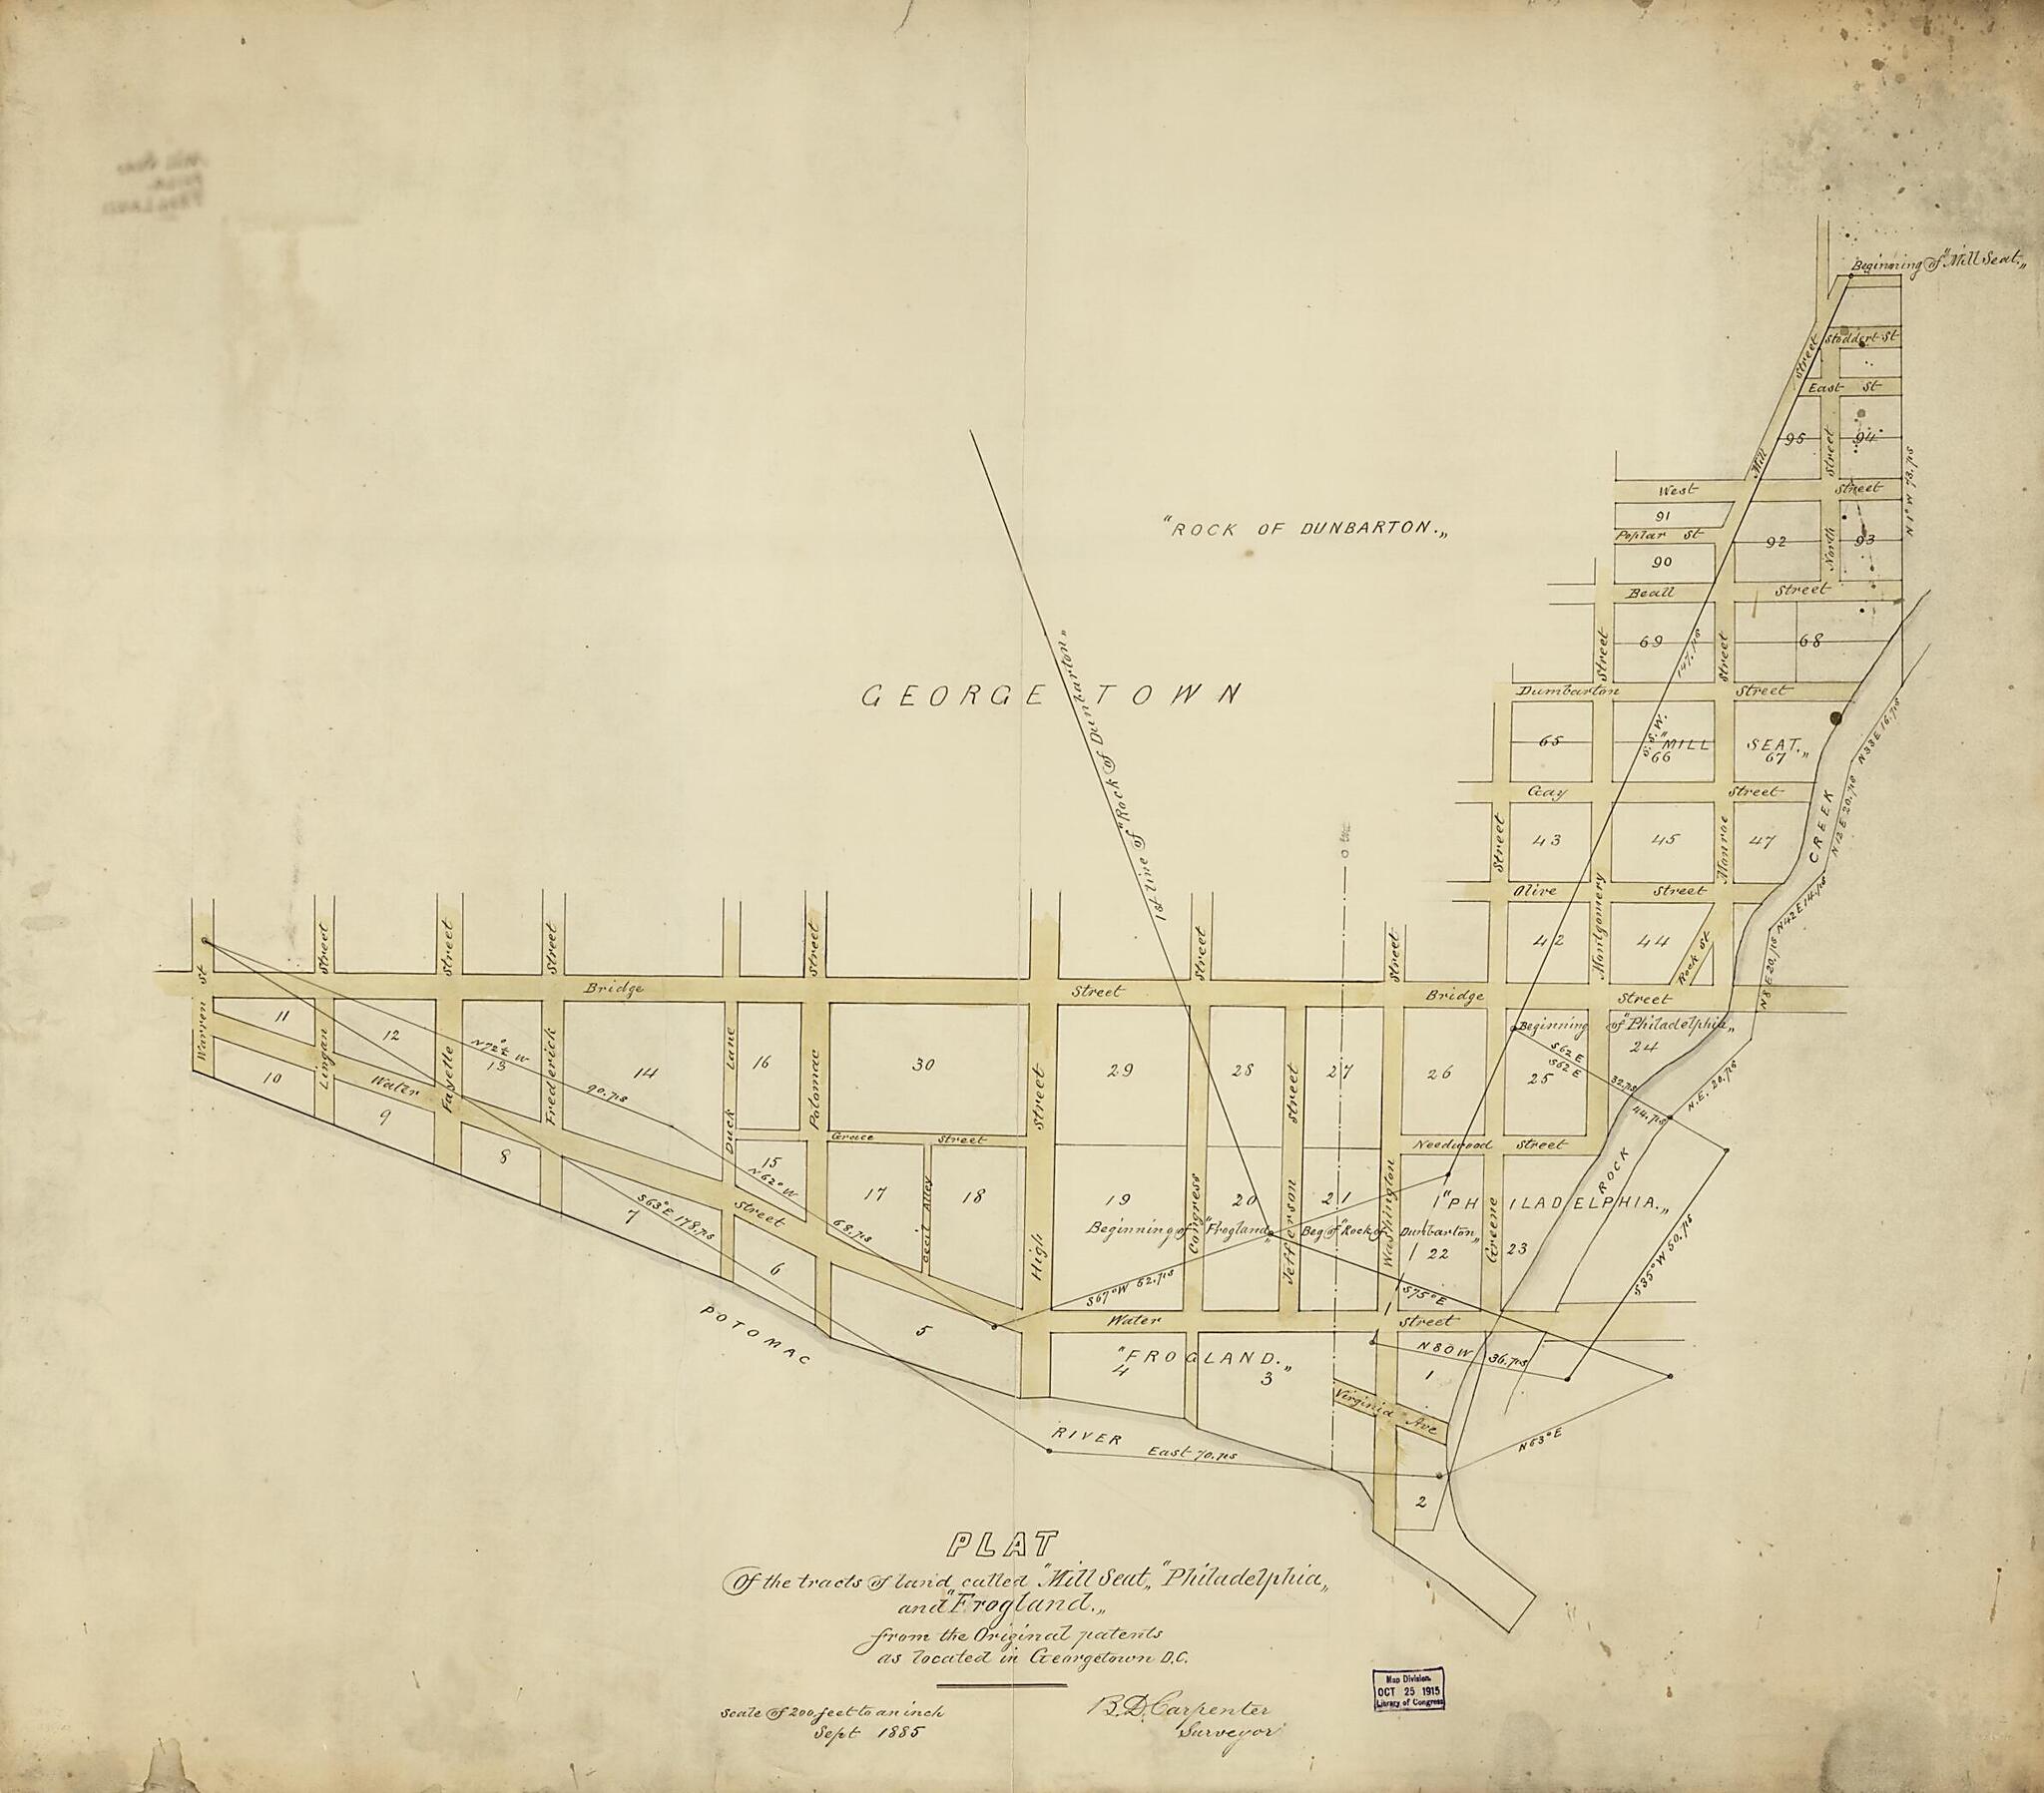 This old map of Plat of the Tracts of Land Called Mill Seat, Philadelphia, and Frogland, from the Original Patents As Located In Georgetown D.C from 1885 was created by B. D. (Benjamin D.) Carpenter in 1885